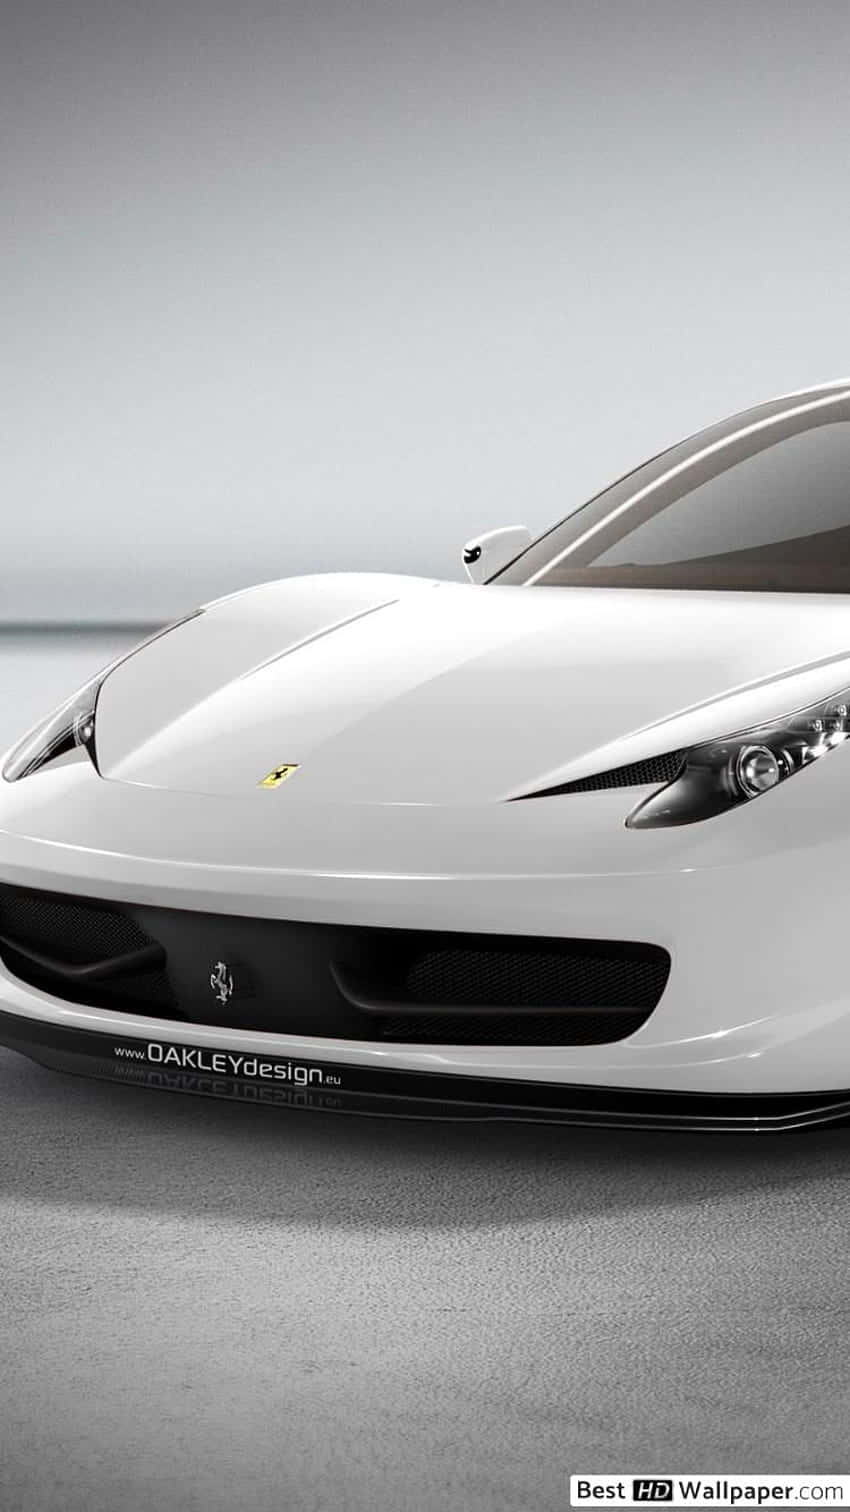 Show off your passion for the finer things in life - a white Ferrari and an iPhone Wallpaper